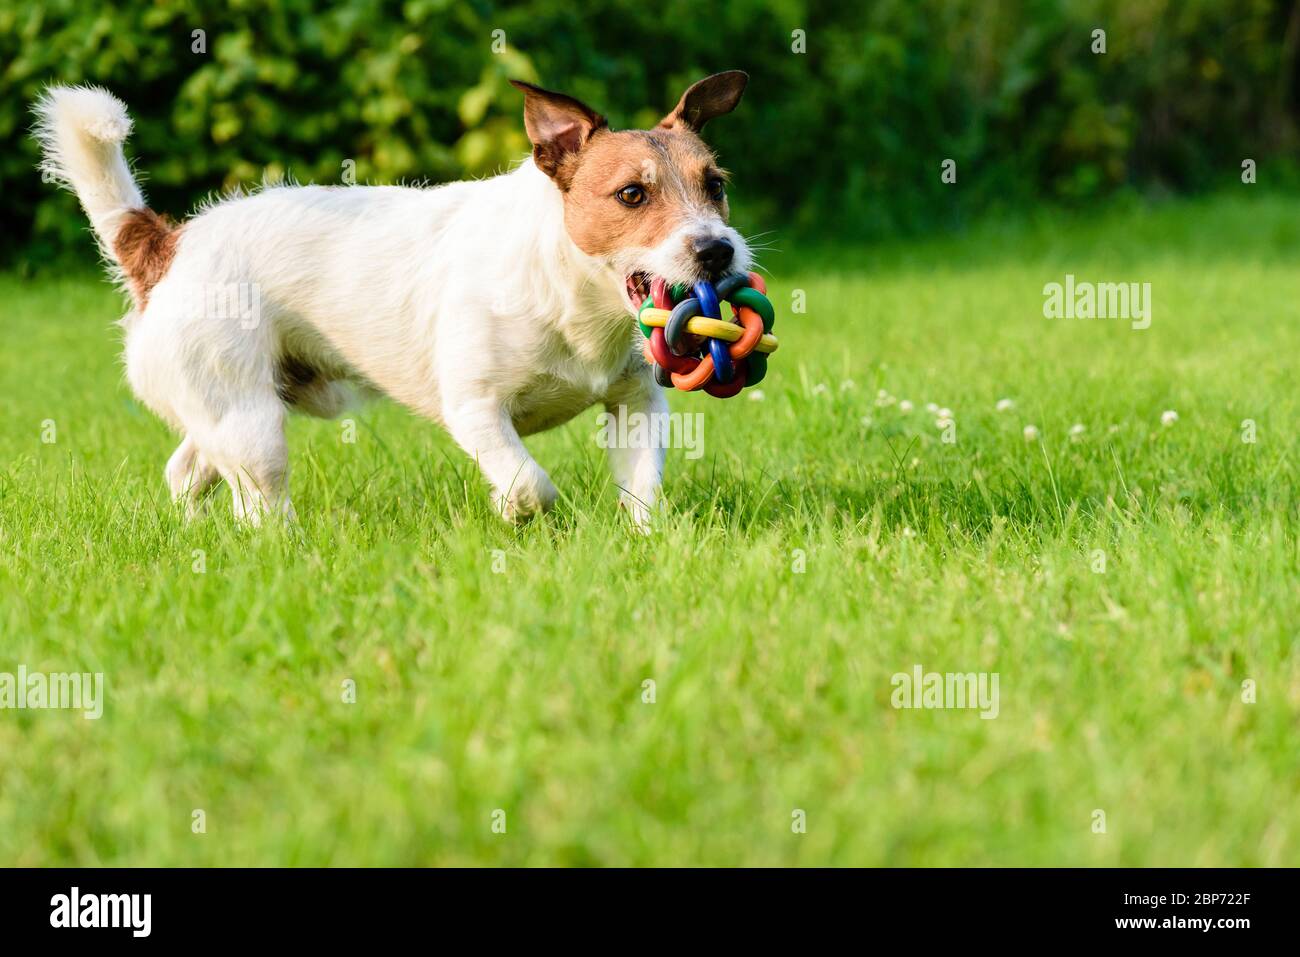 Fun time at backyard concept - playing with happy family dog and toy Stock Photo